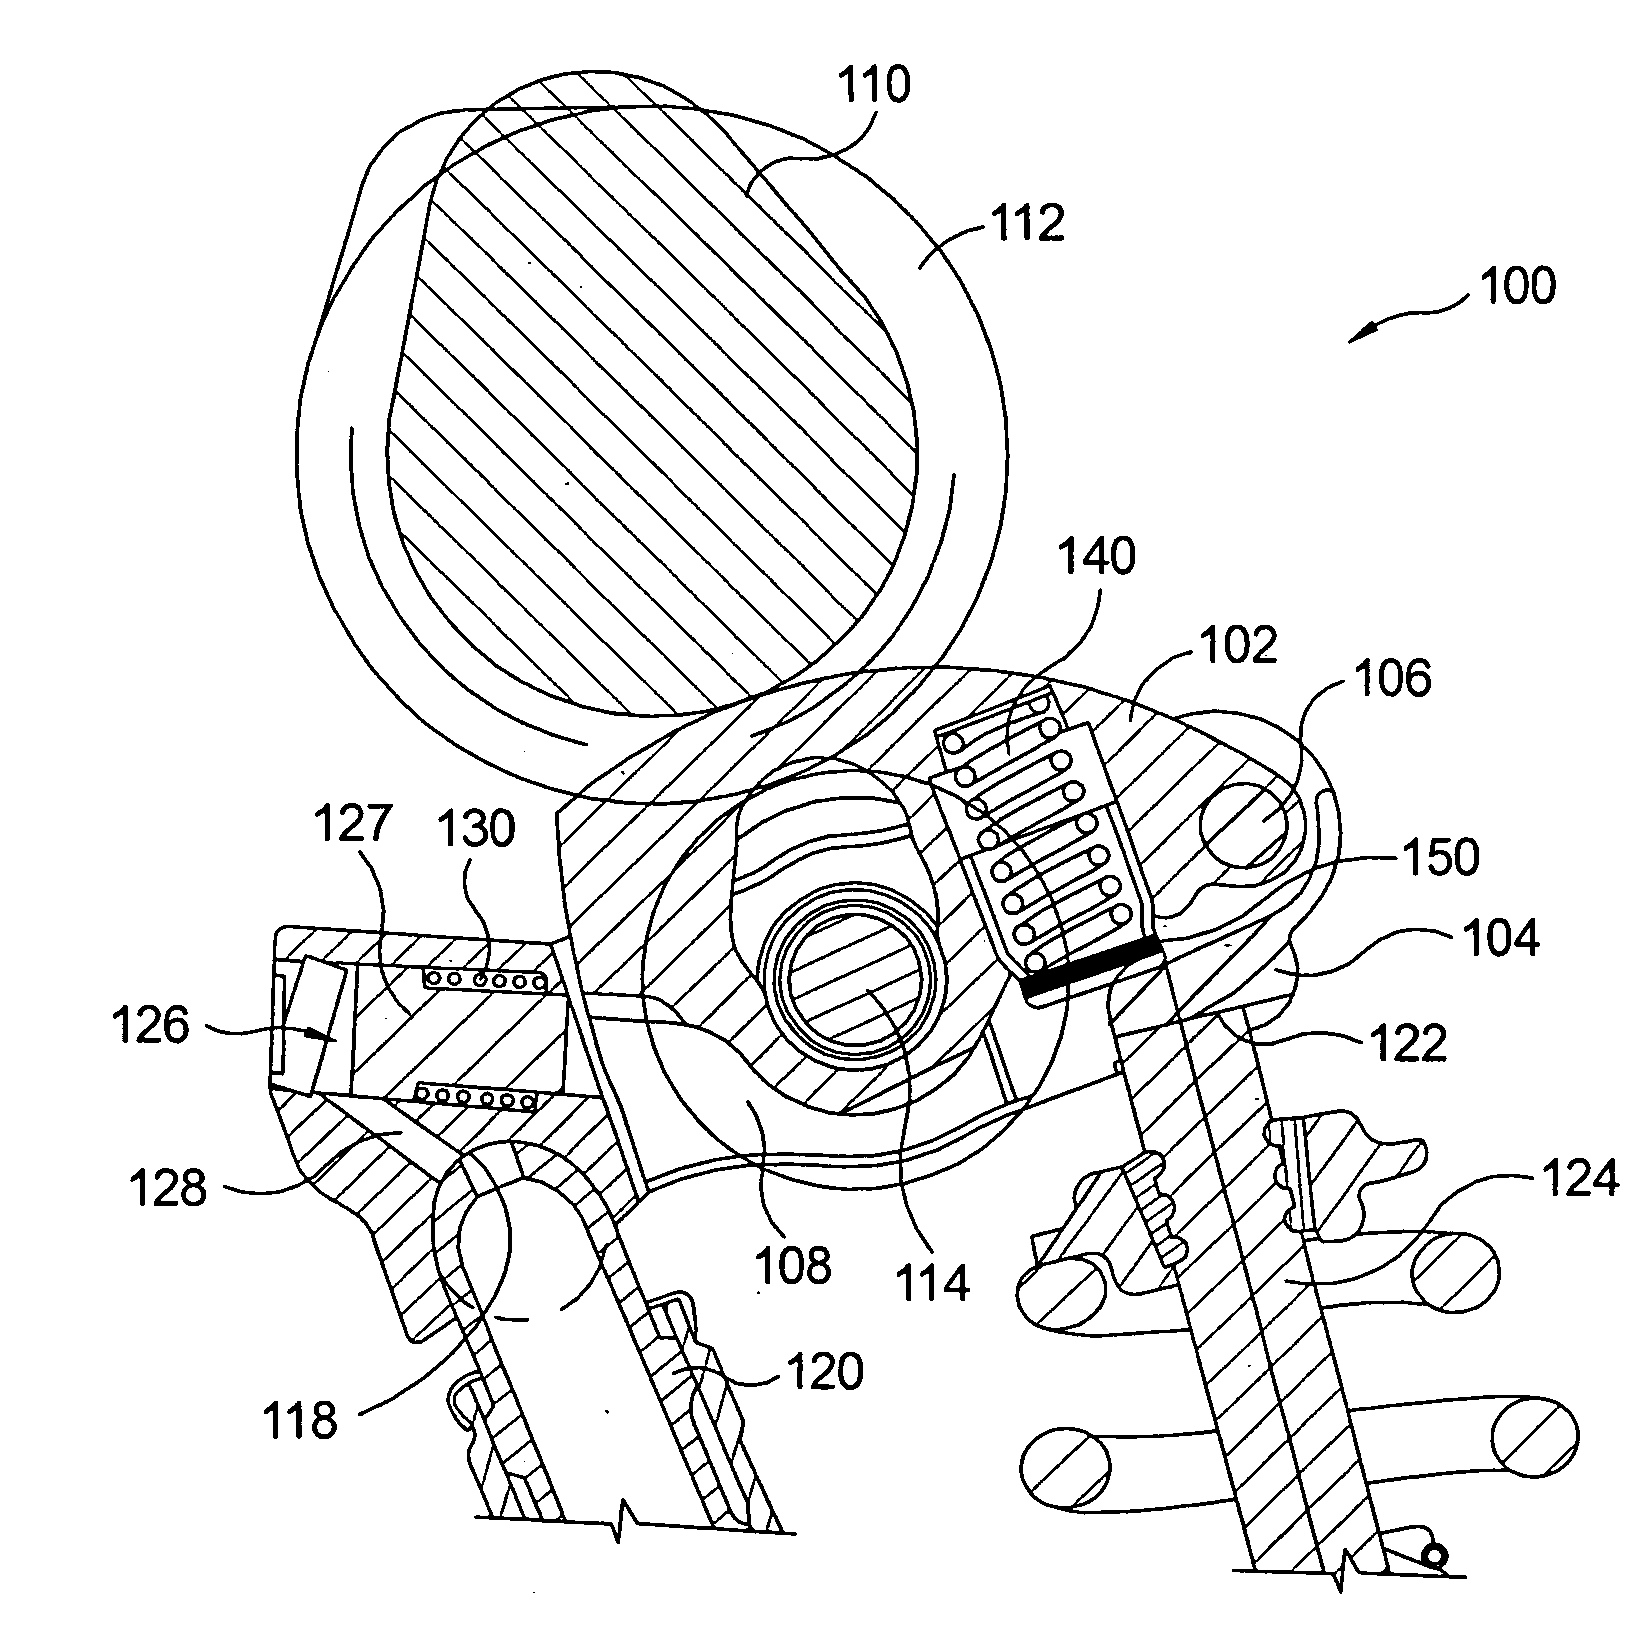 Diagnostics for two-mode variable valve activation devices